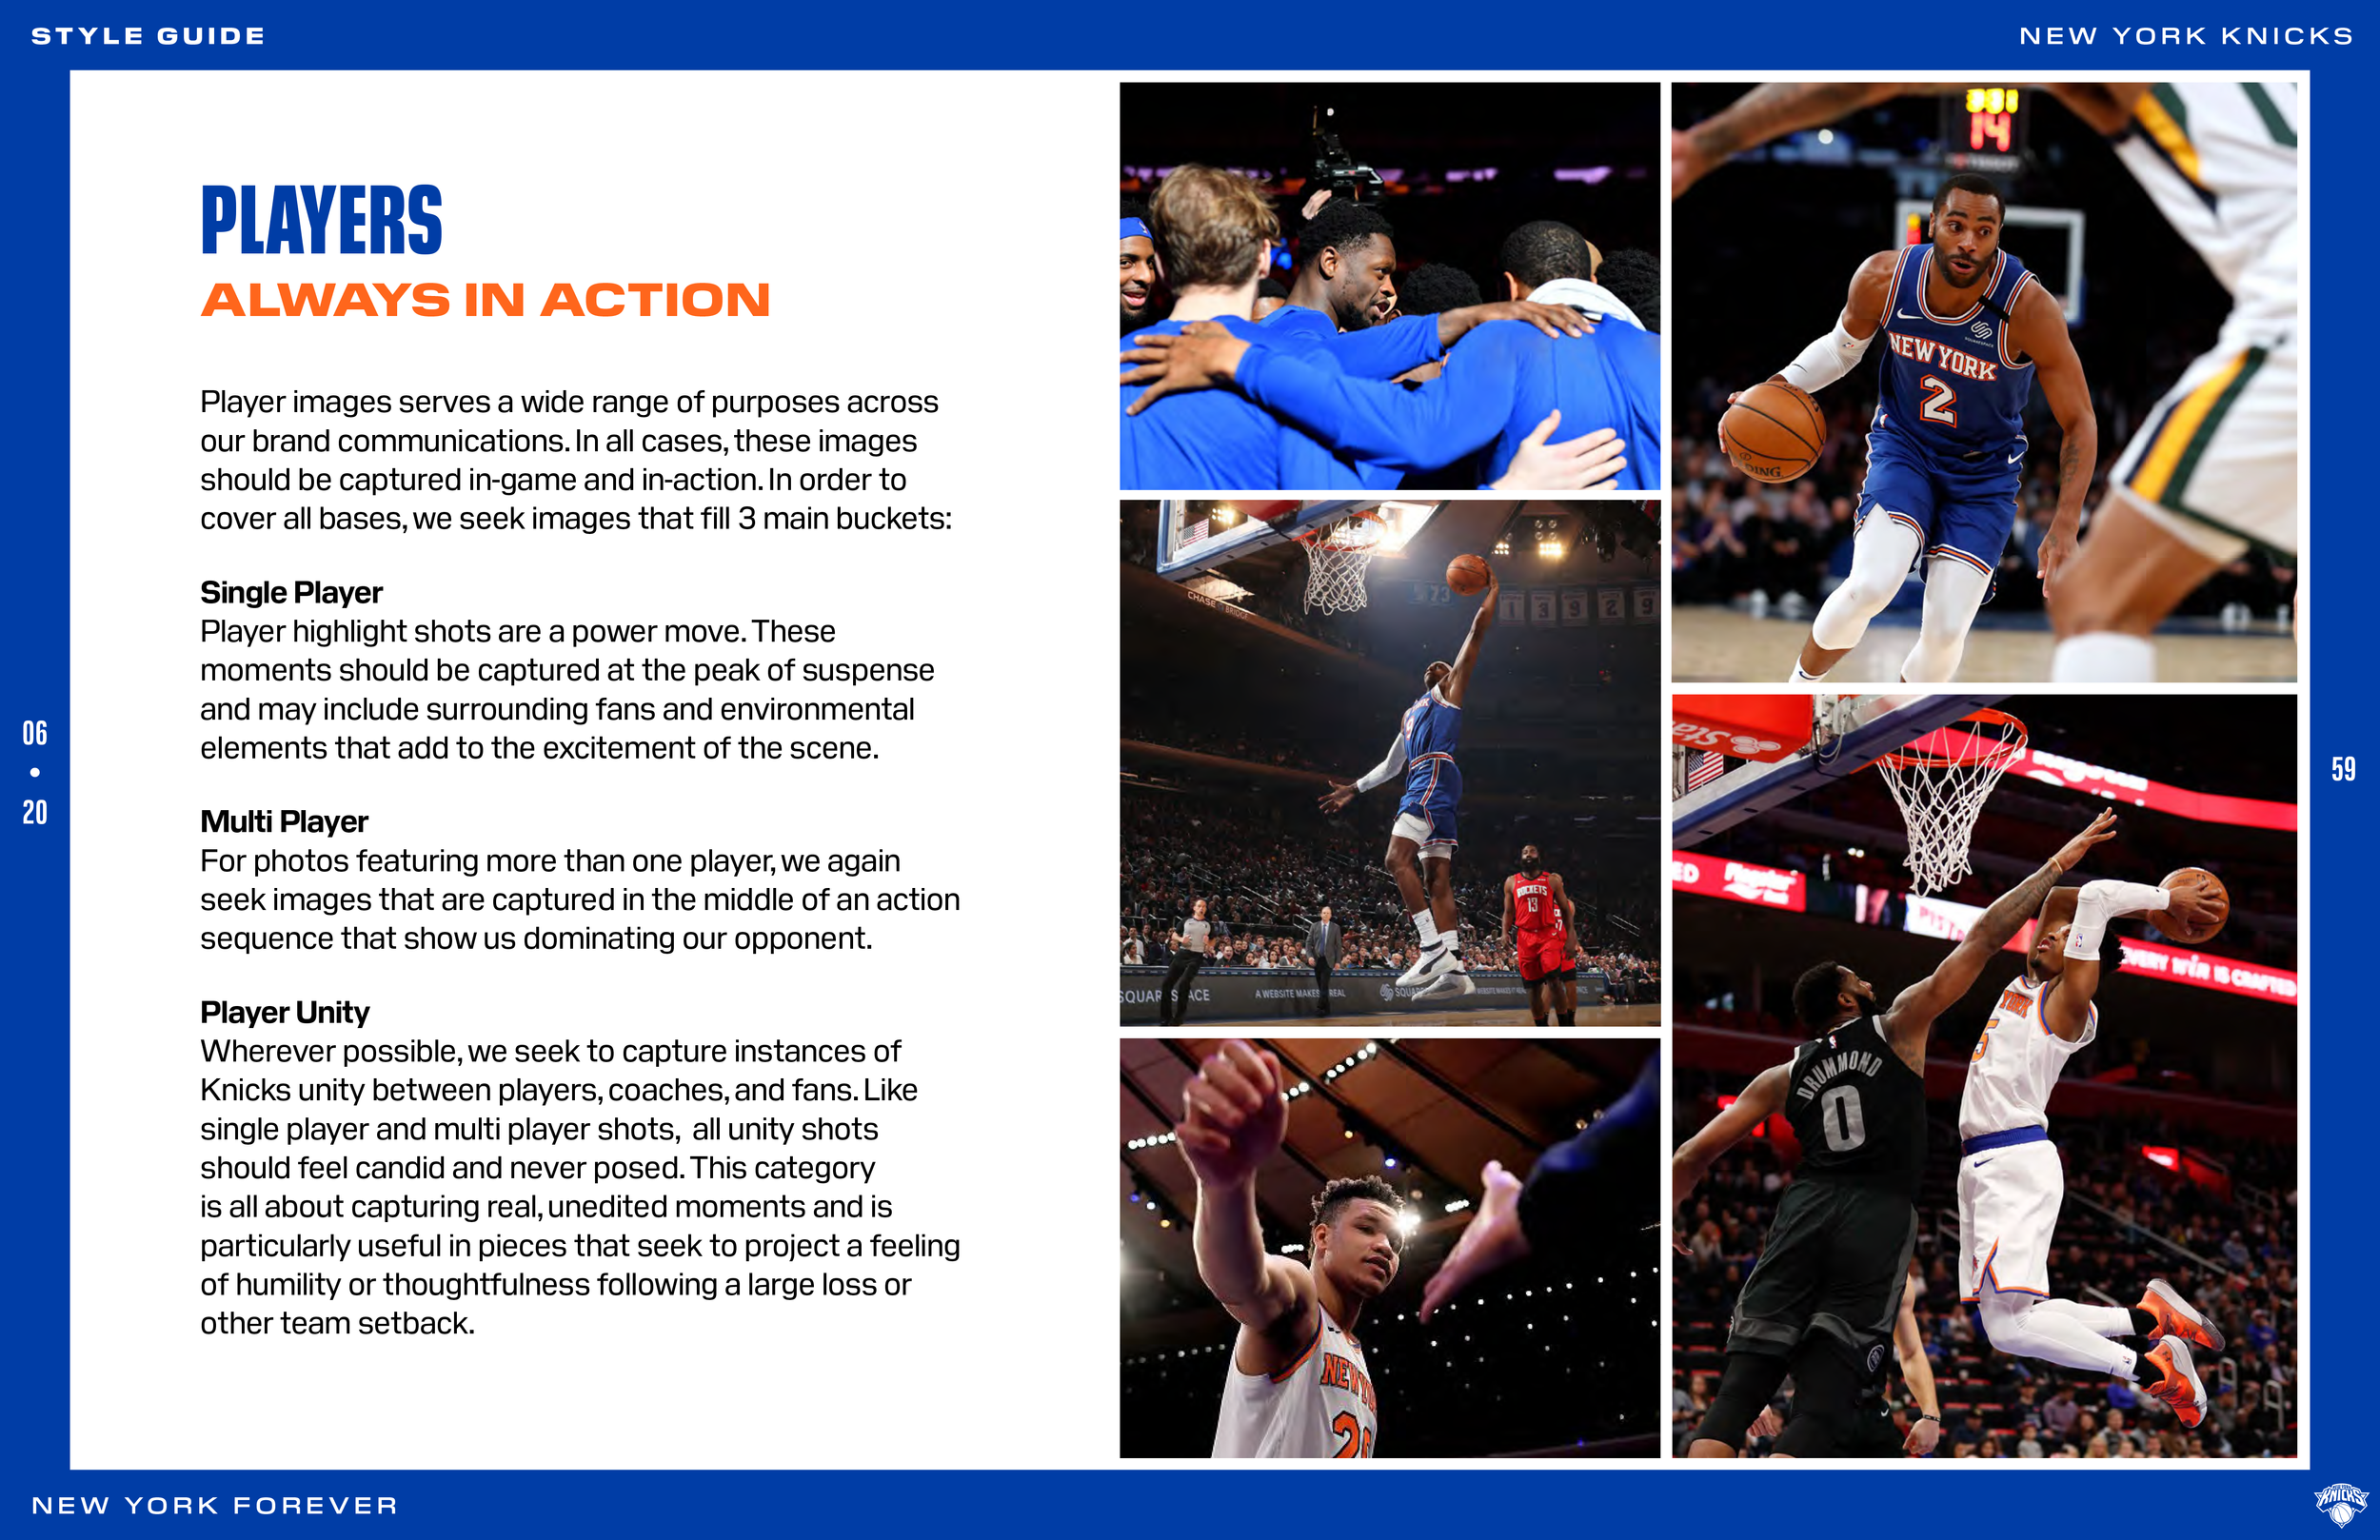 Pages from KNICKS_StyleGuide_062420 59.png